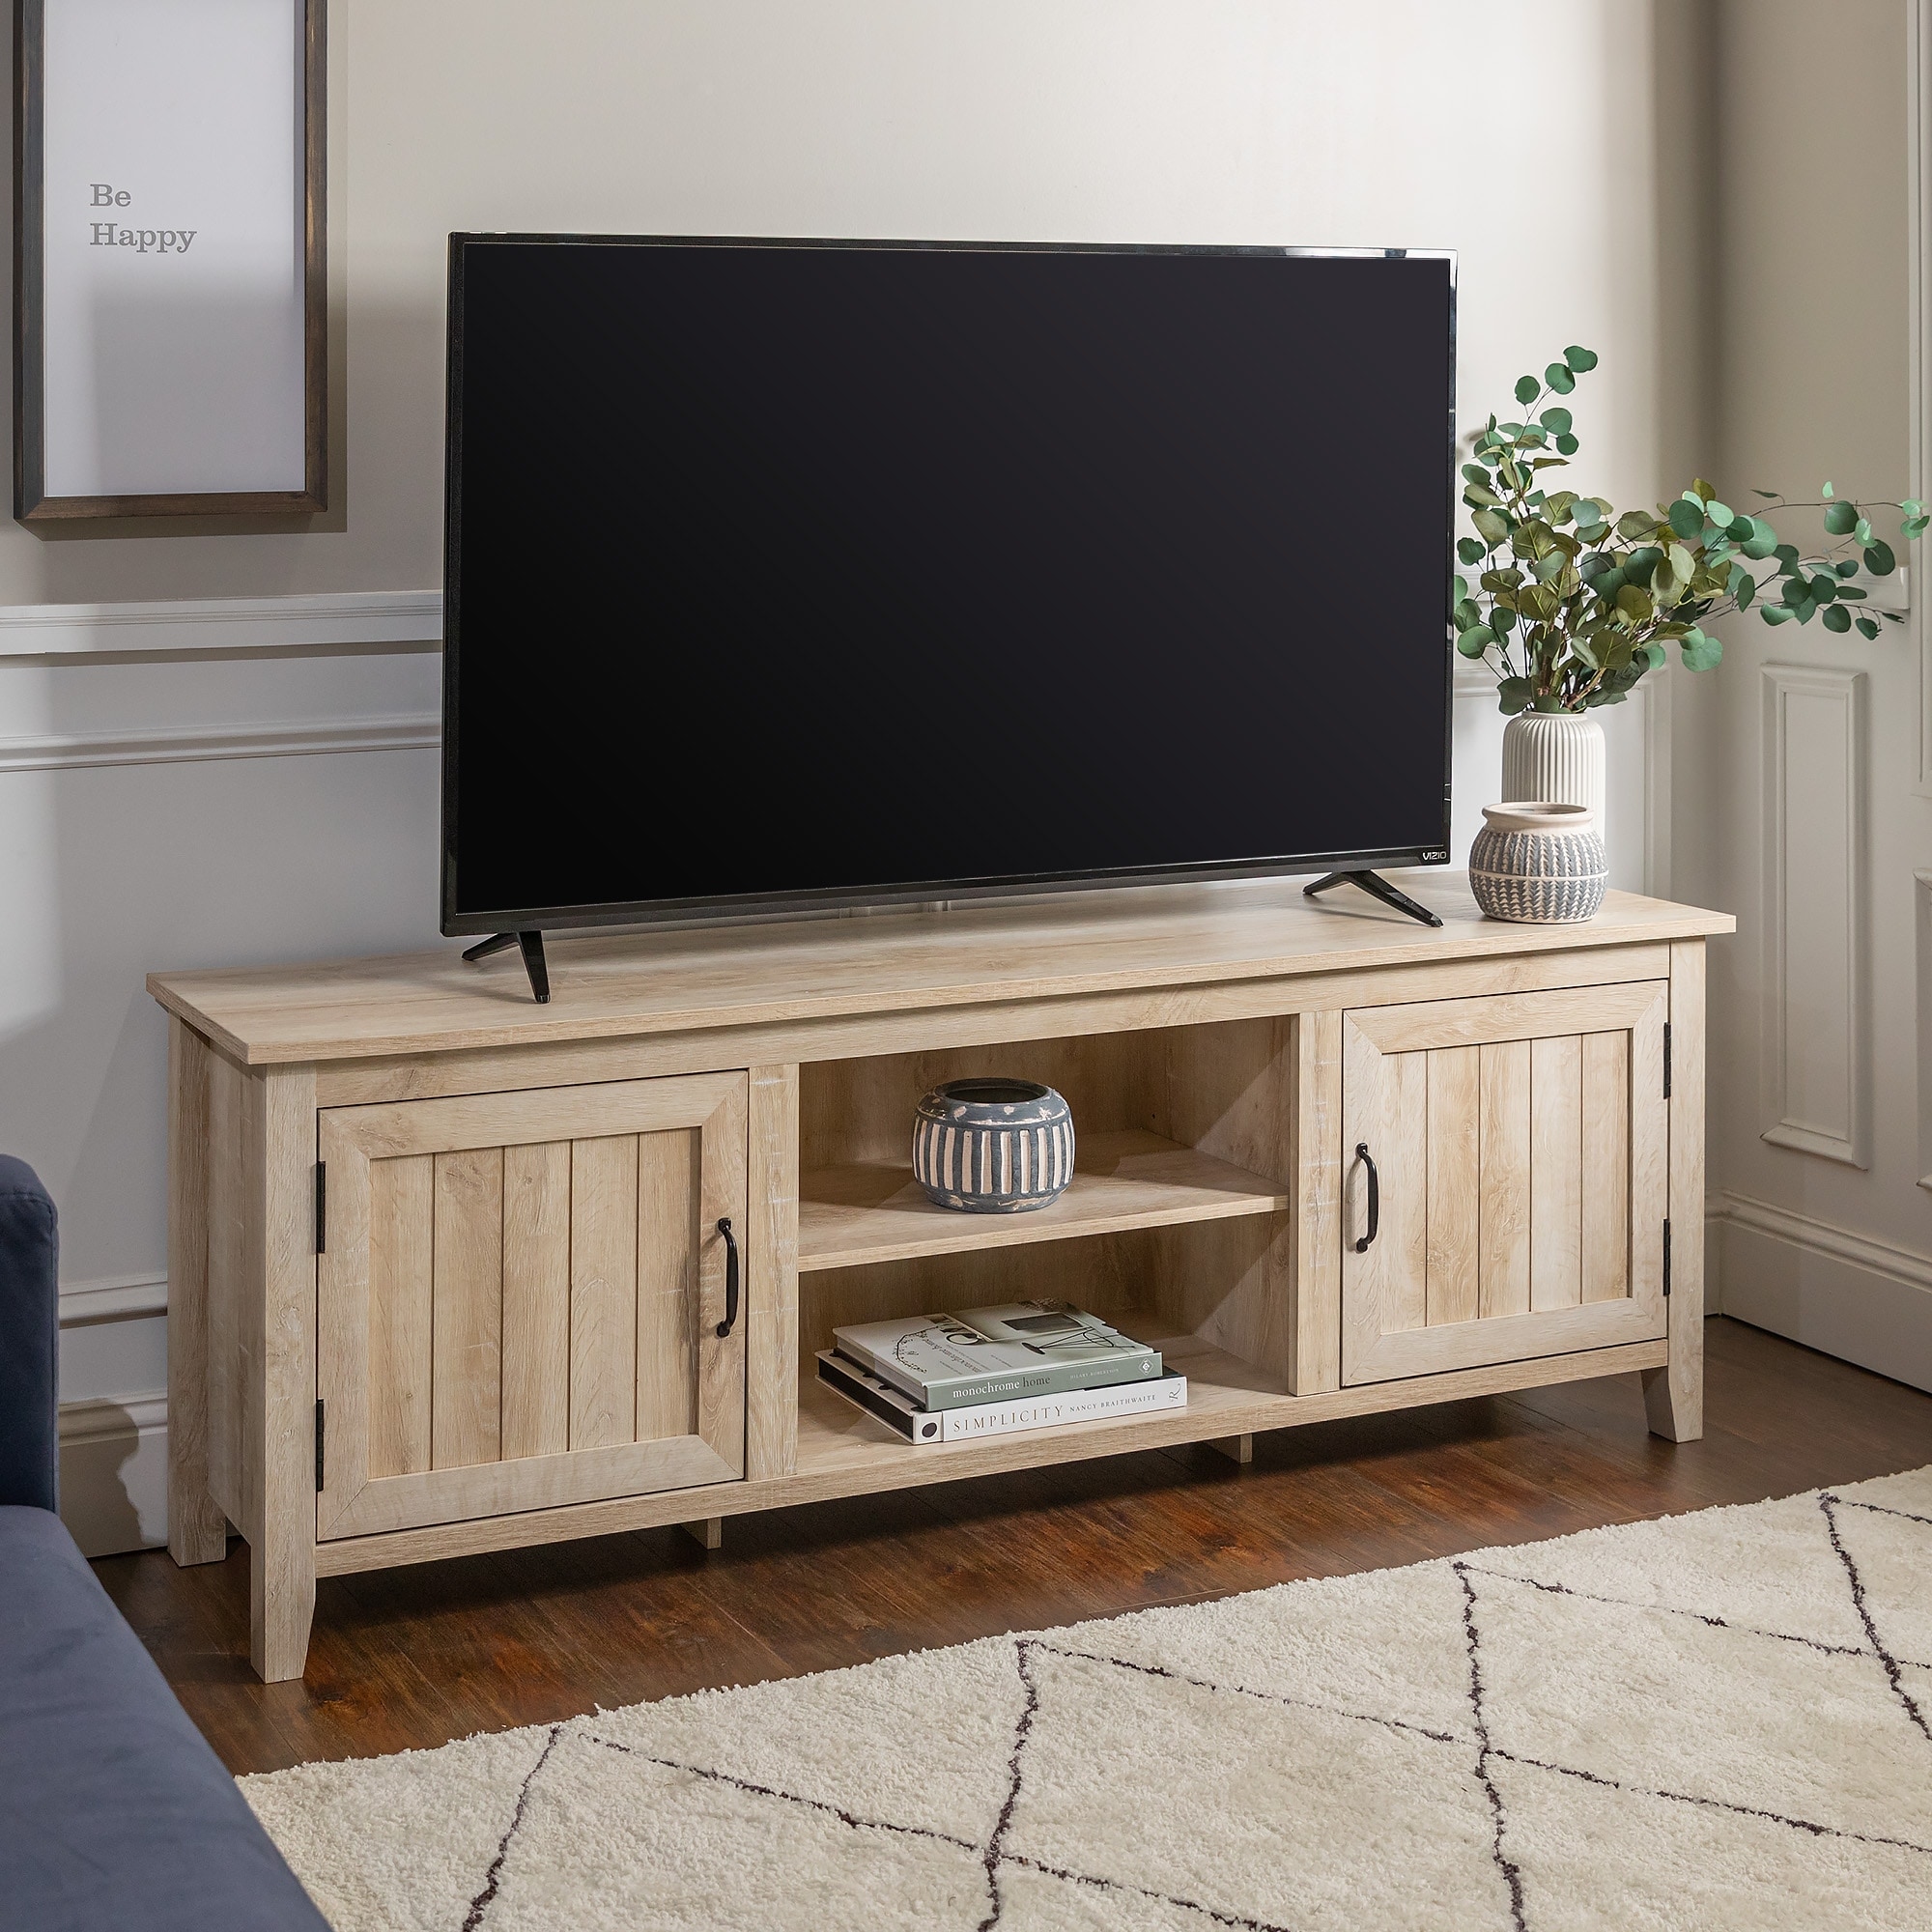 B86319-GRW/BLANC Sea Winds Trading TV Stands